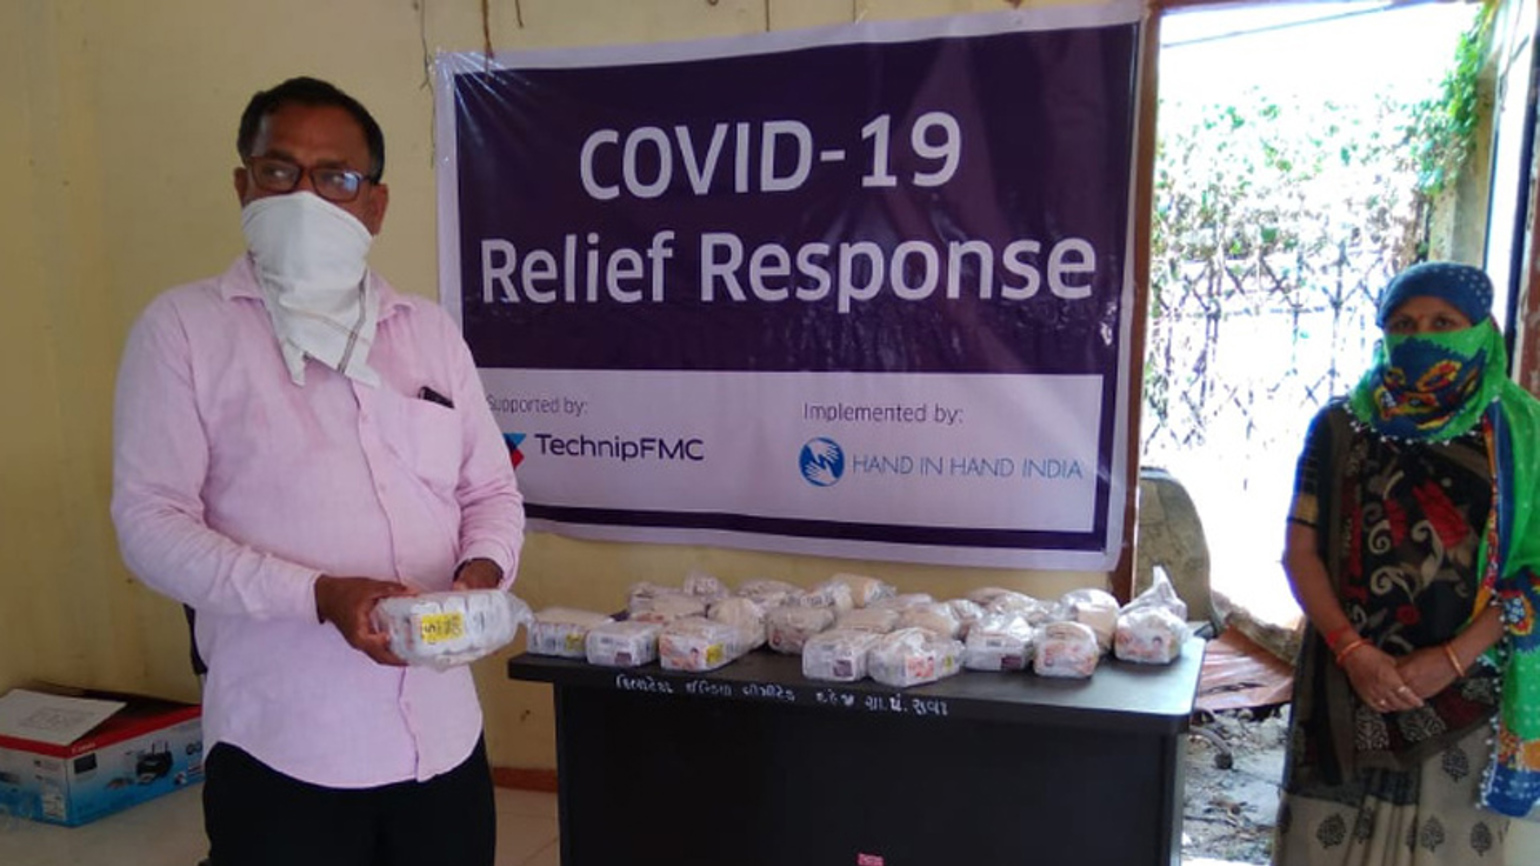 our-indian-teams-help-thousands-in-need-during-covid-19-crisis-hotspot-960x540